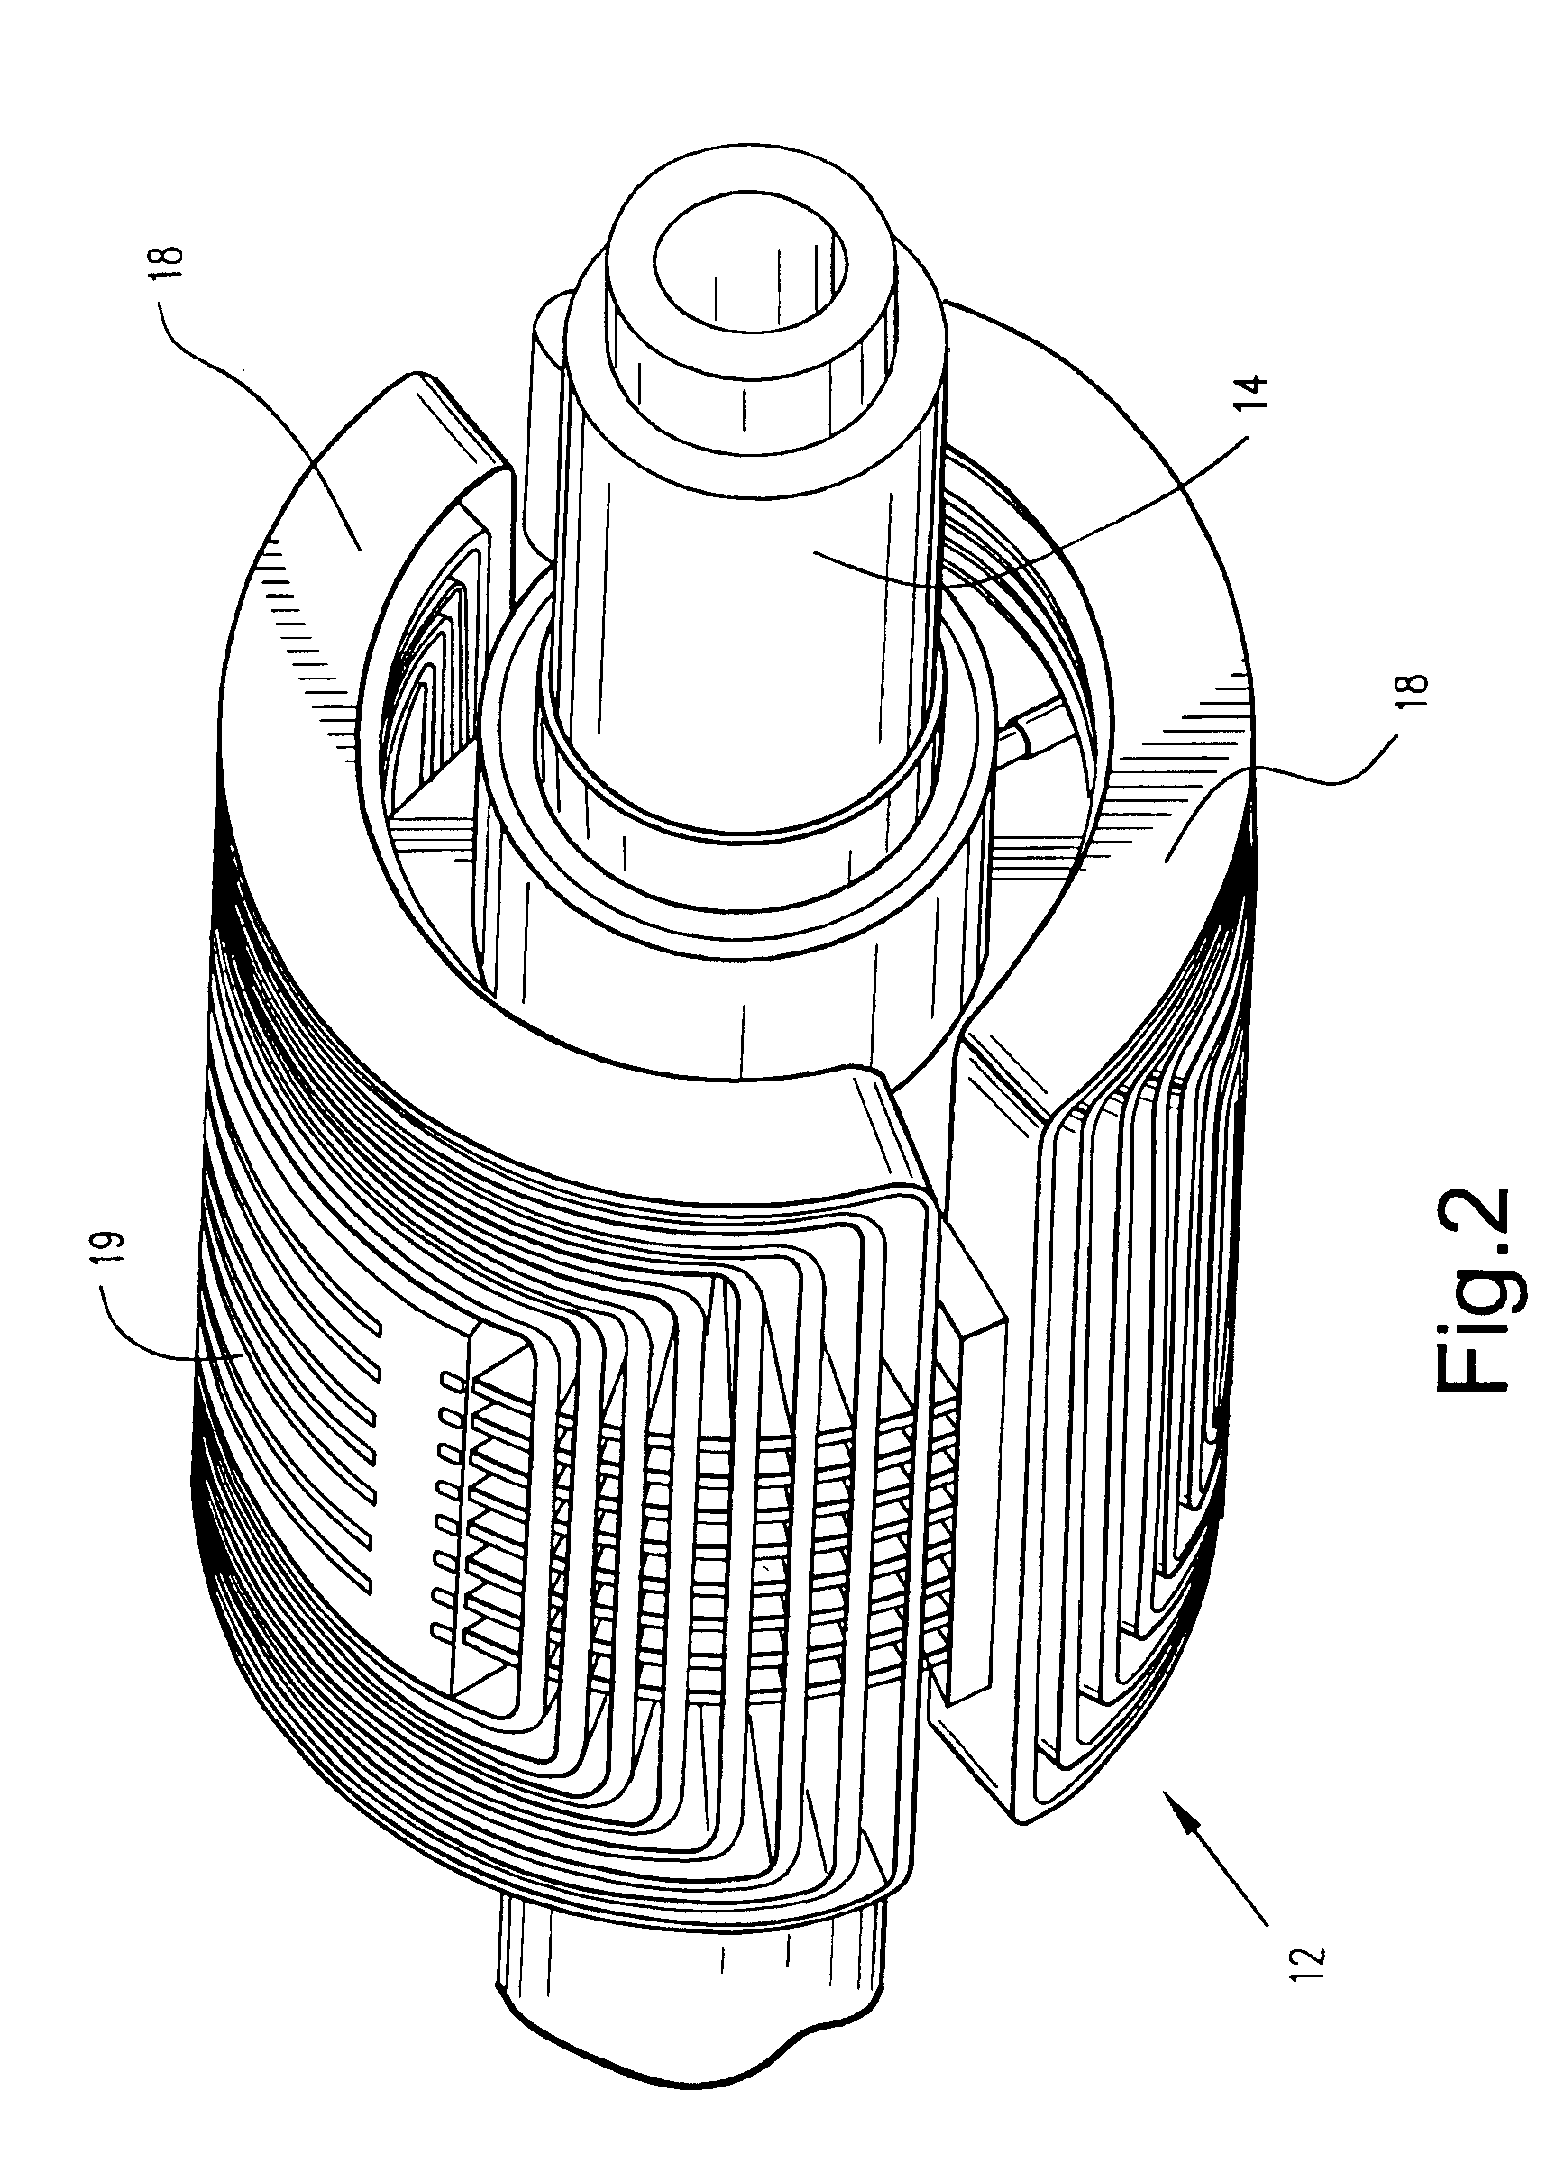 Structural enclosed rotor configuration for electric machine